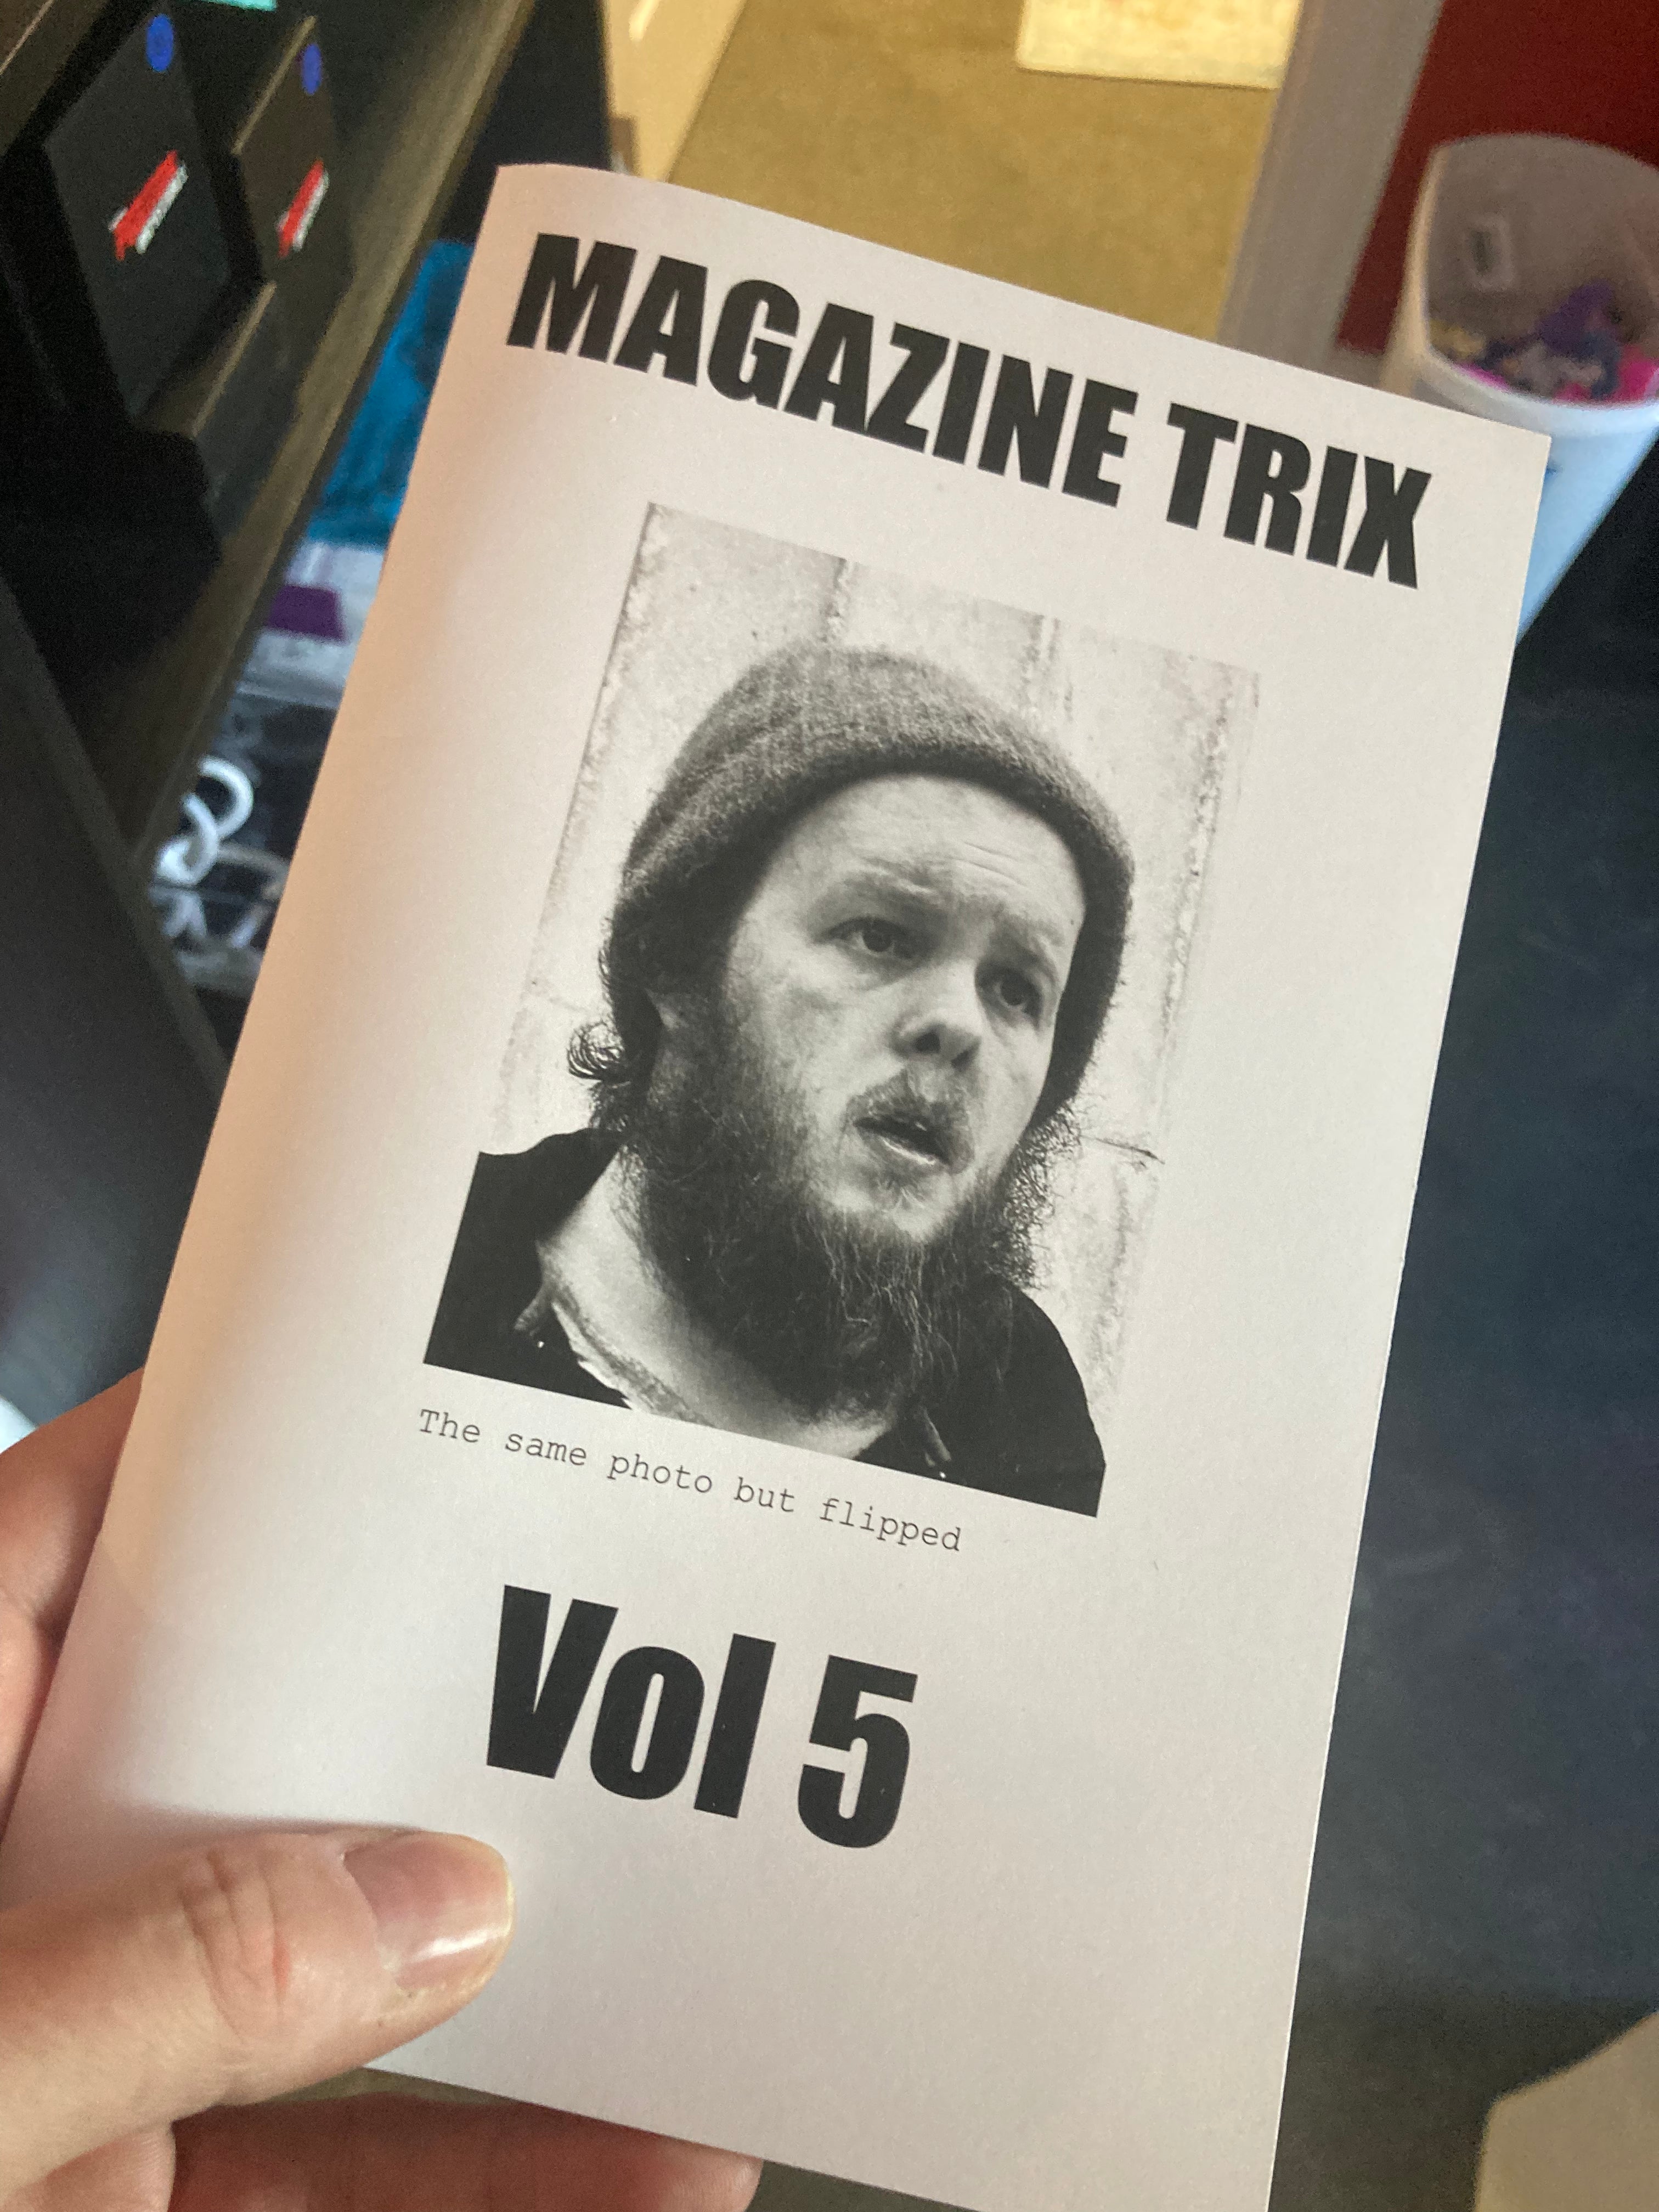 Magazine Trix Vol 5 by Just Andy